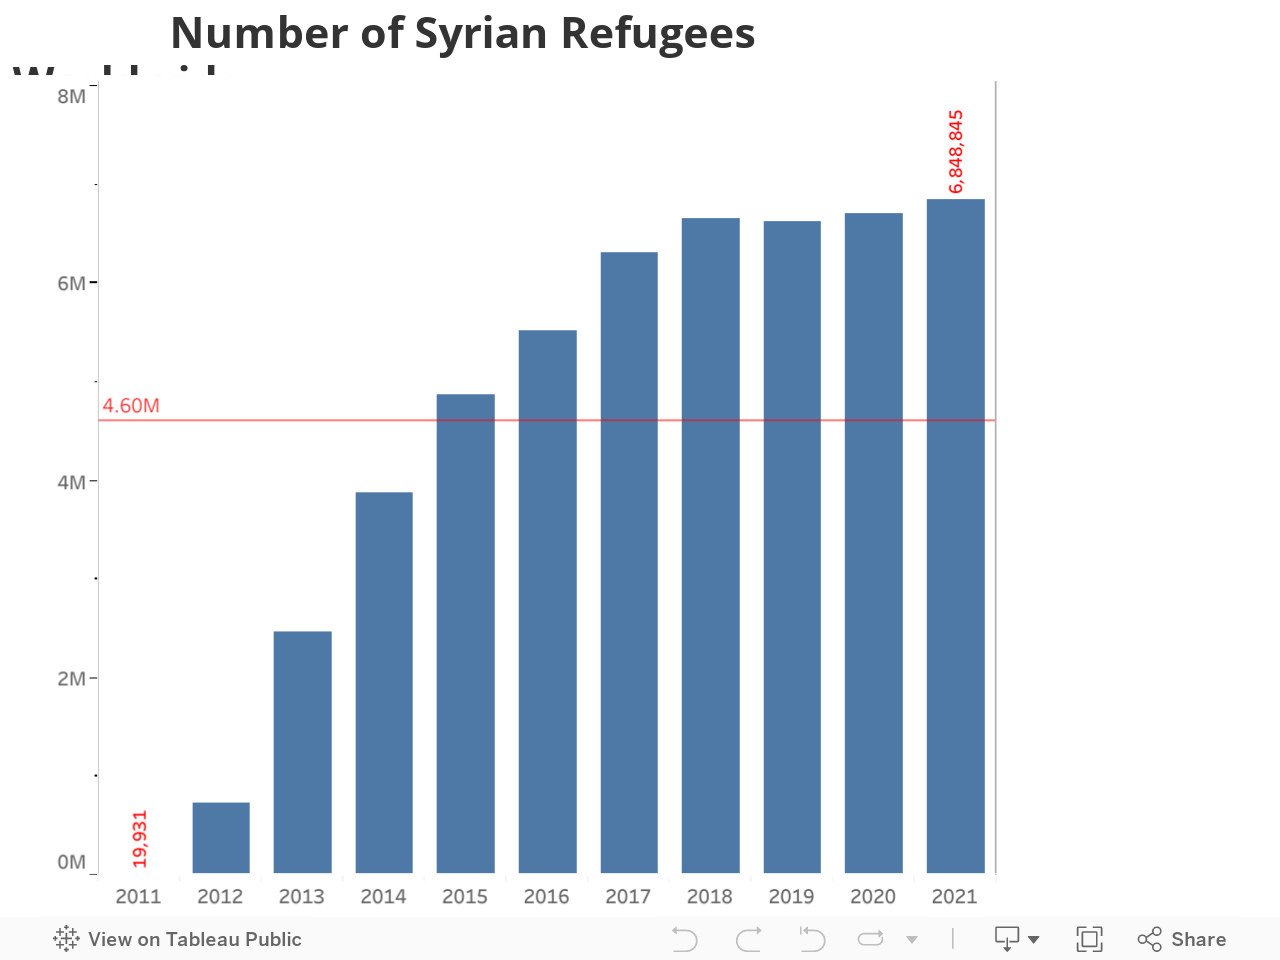               Number of Syrian Refugees Worldwide 